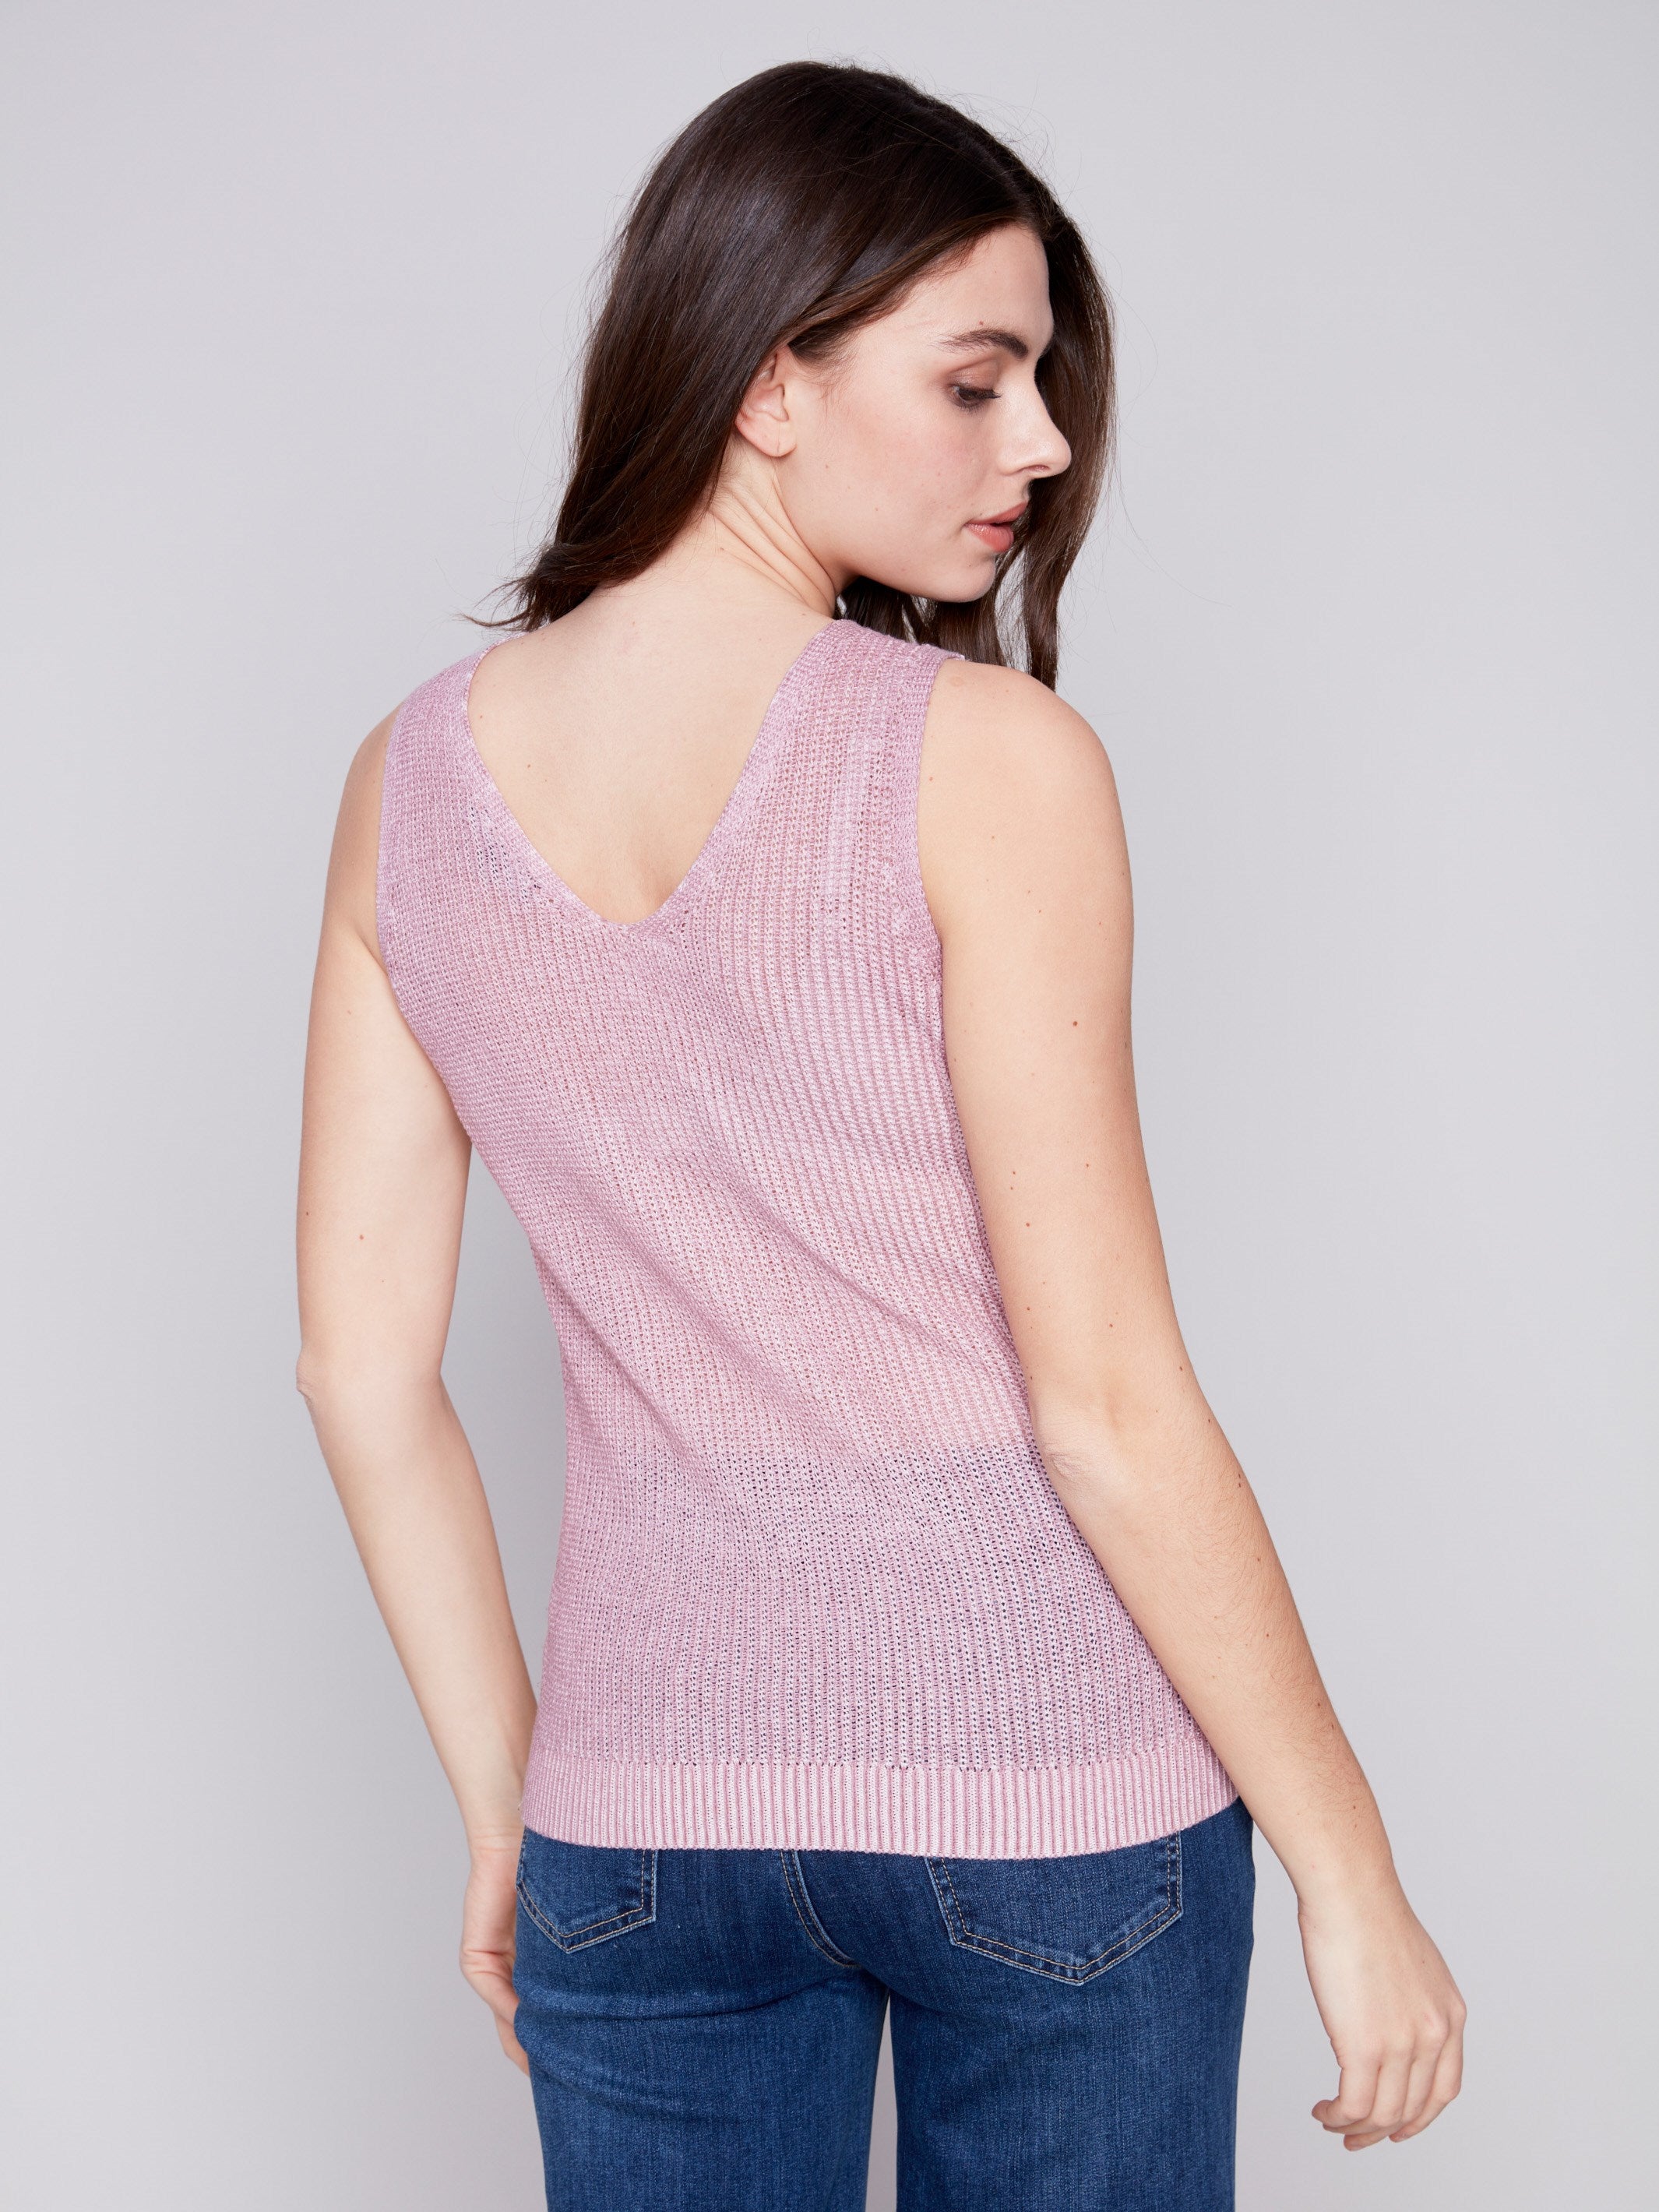 Charlie B Cold-Dye Knit Cami - Dusty Rose - Image 2